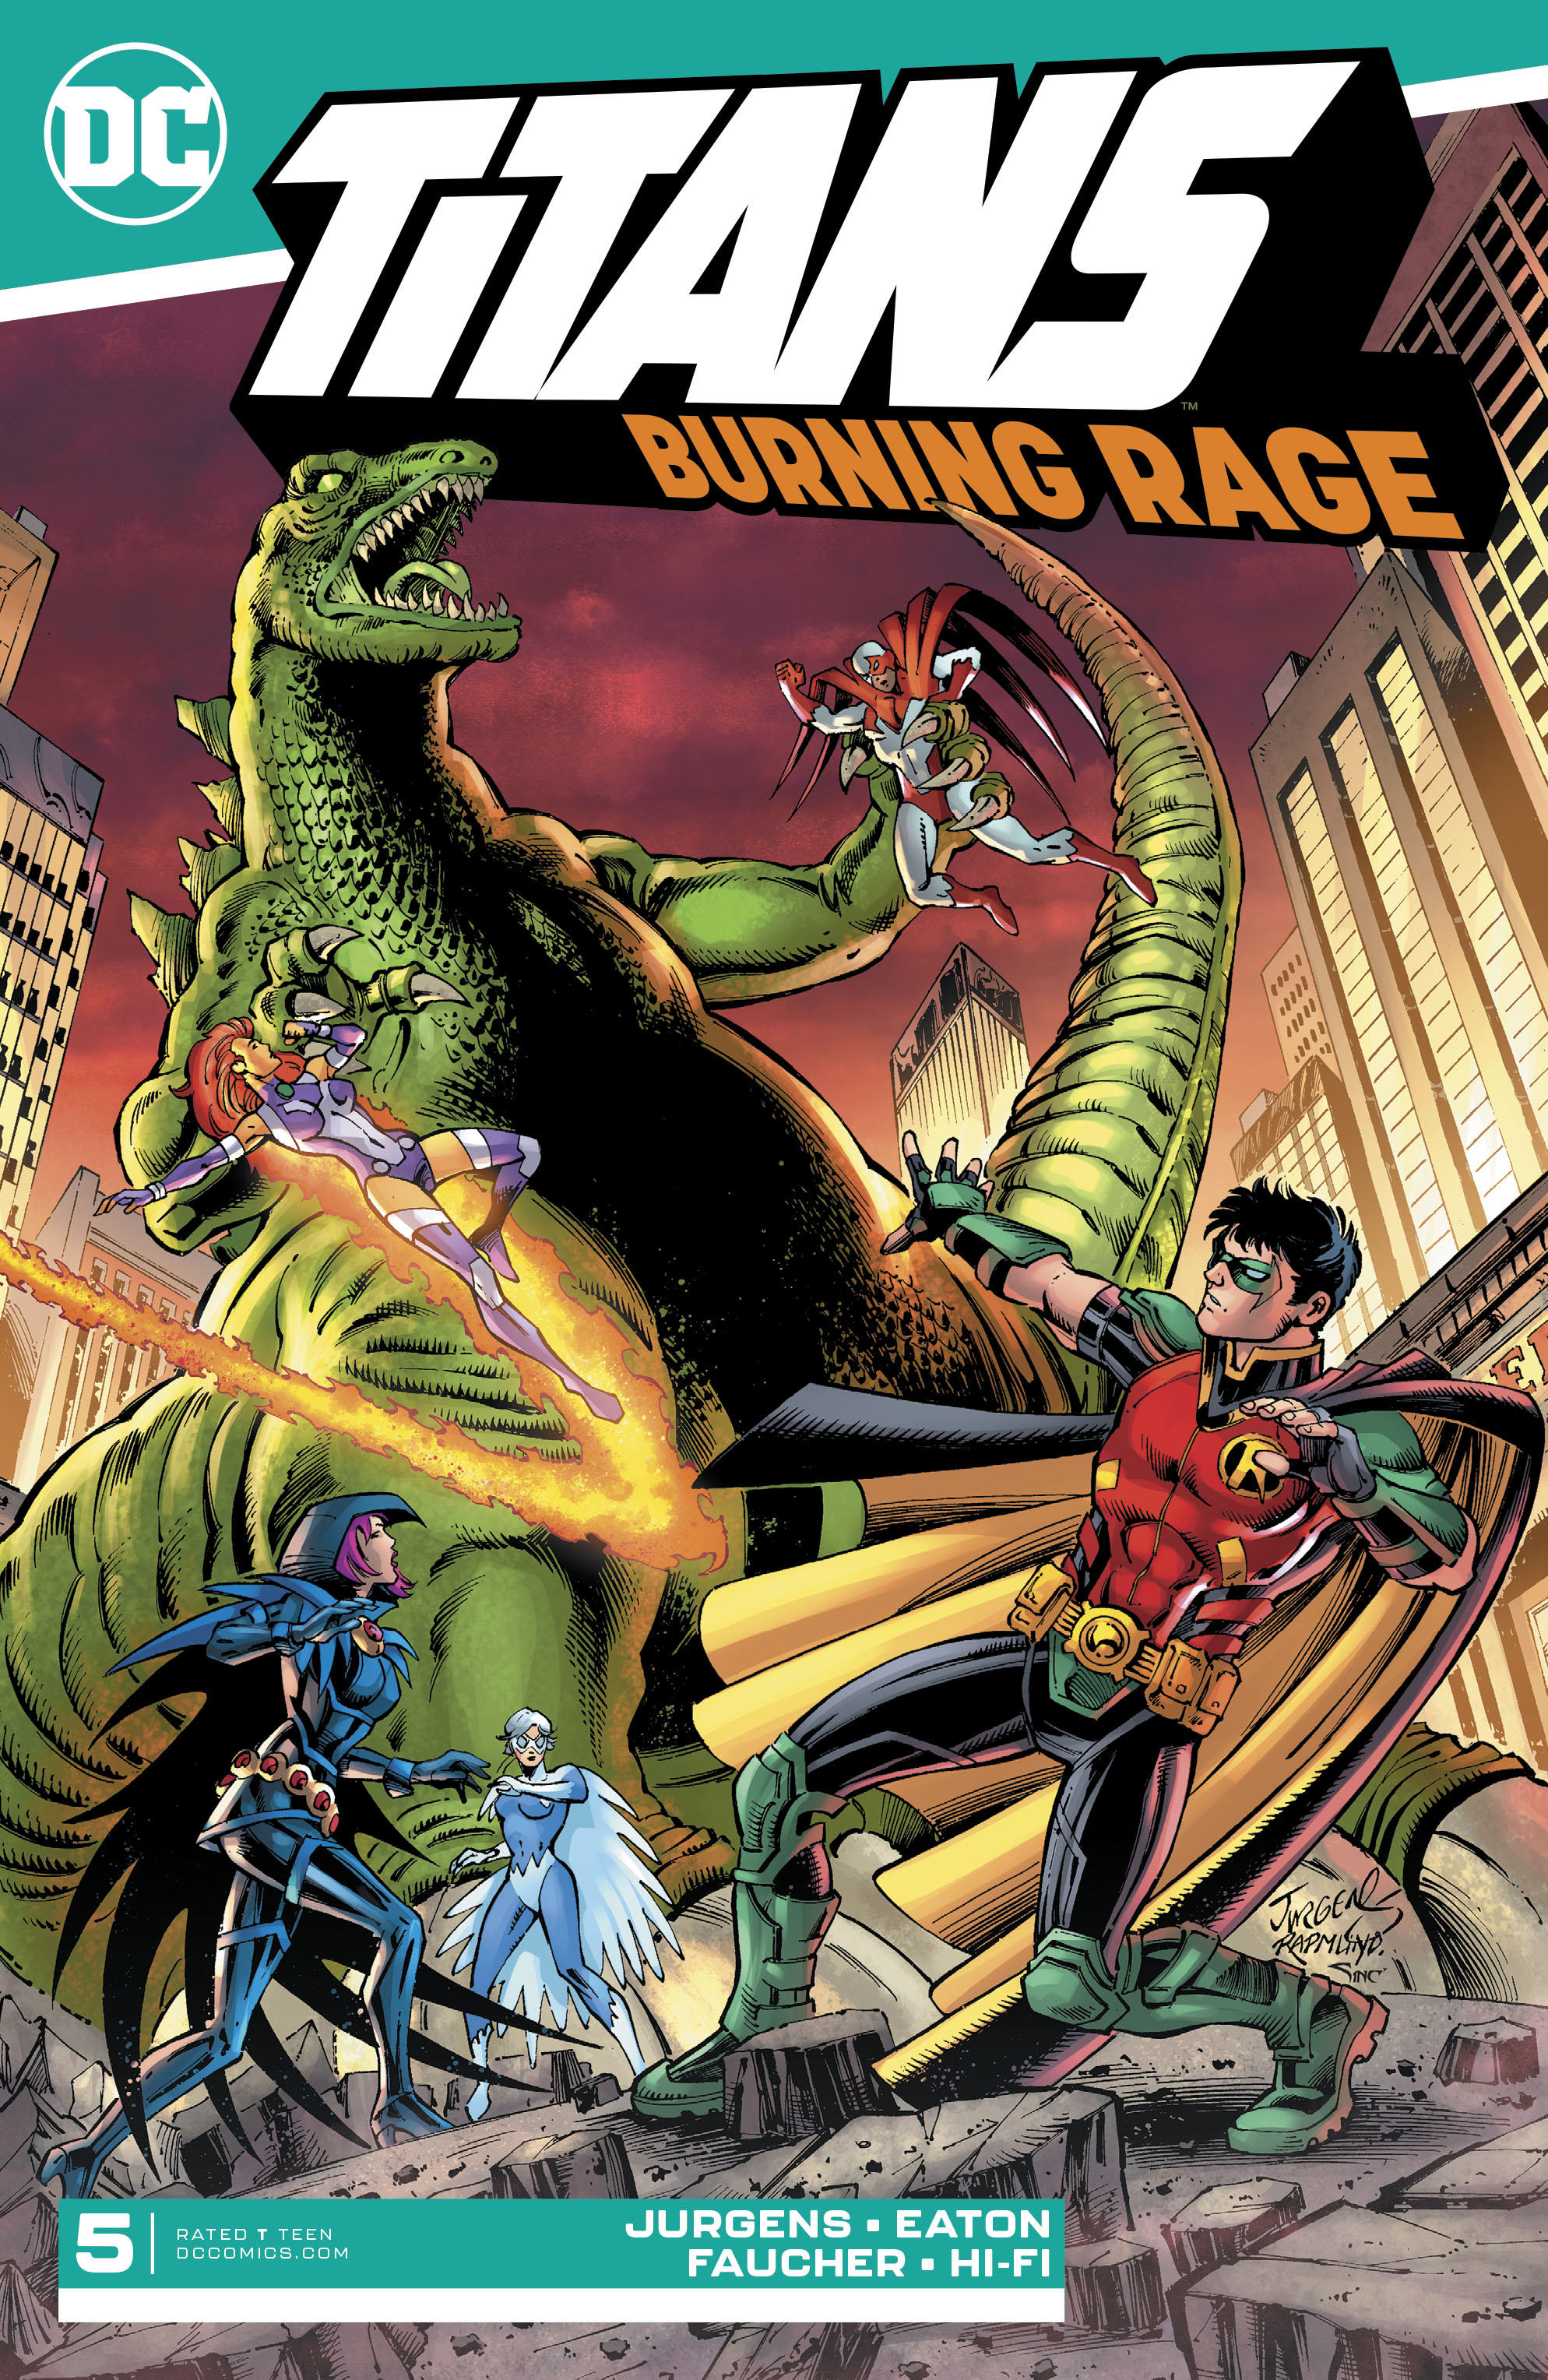 Read online Titans: Burning Rage comic -  Issue #5 - 1